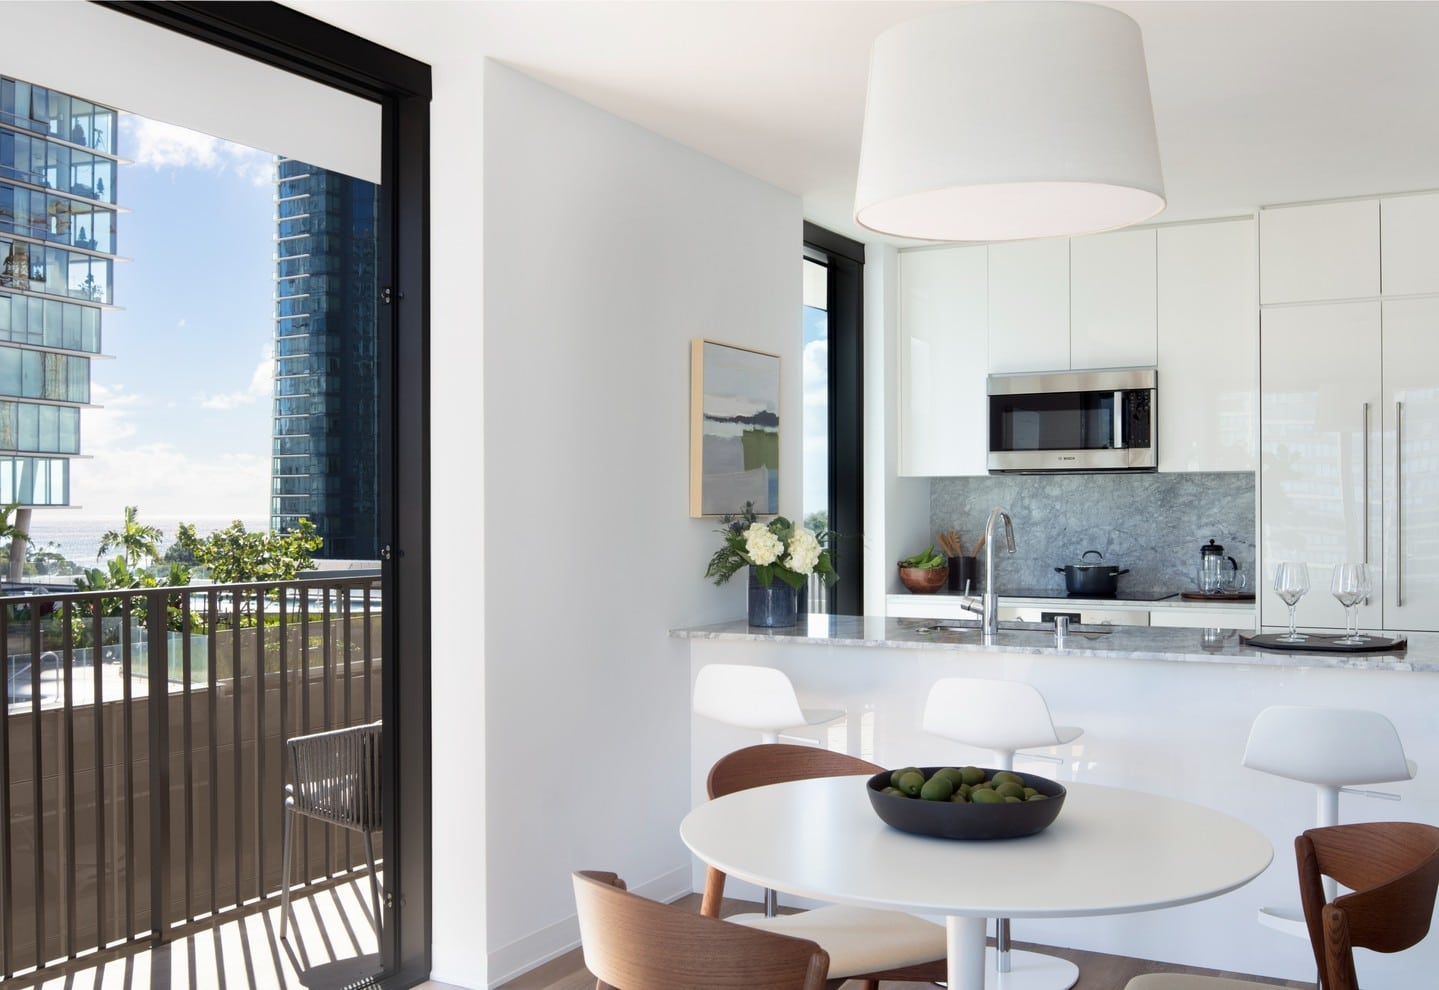 At ‘A‘ali‘i, move-in ready residences offer fresh design, thoughtful details and contemporary kitchens, curated to enhance your every day. Learn more at www.aaliiwardvillage.com.